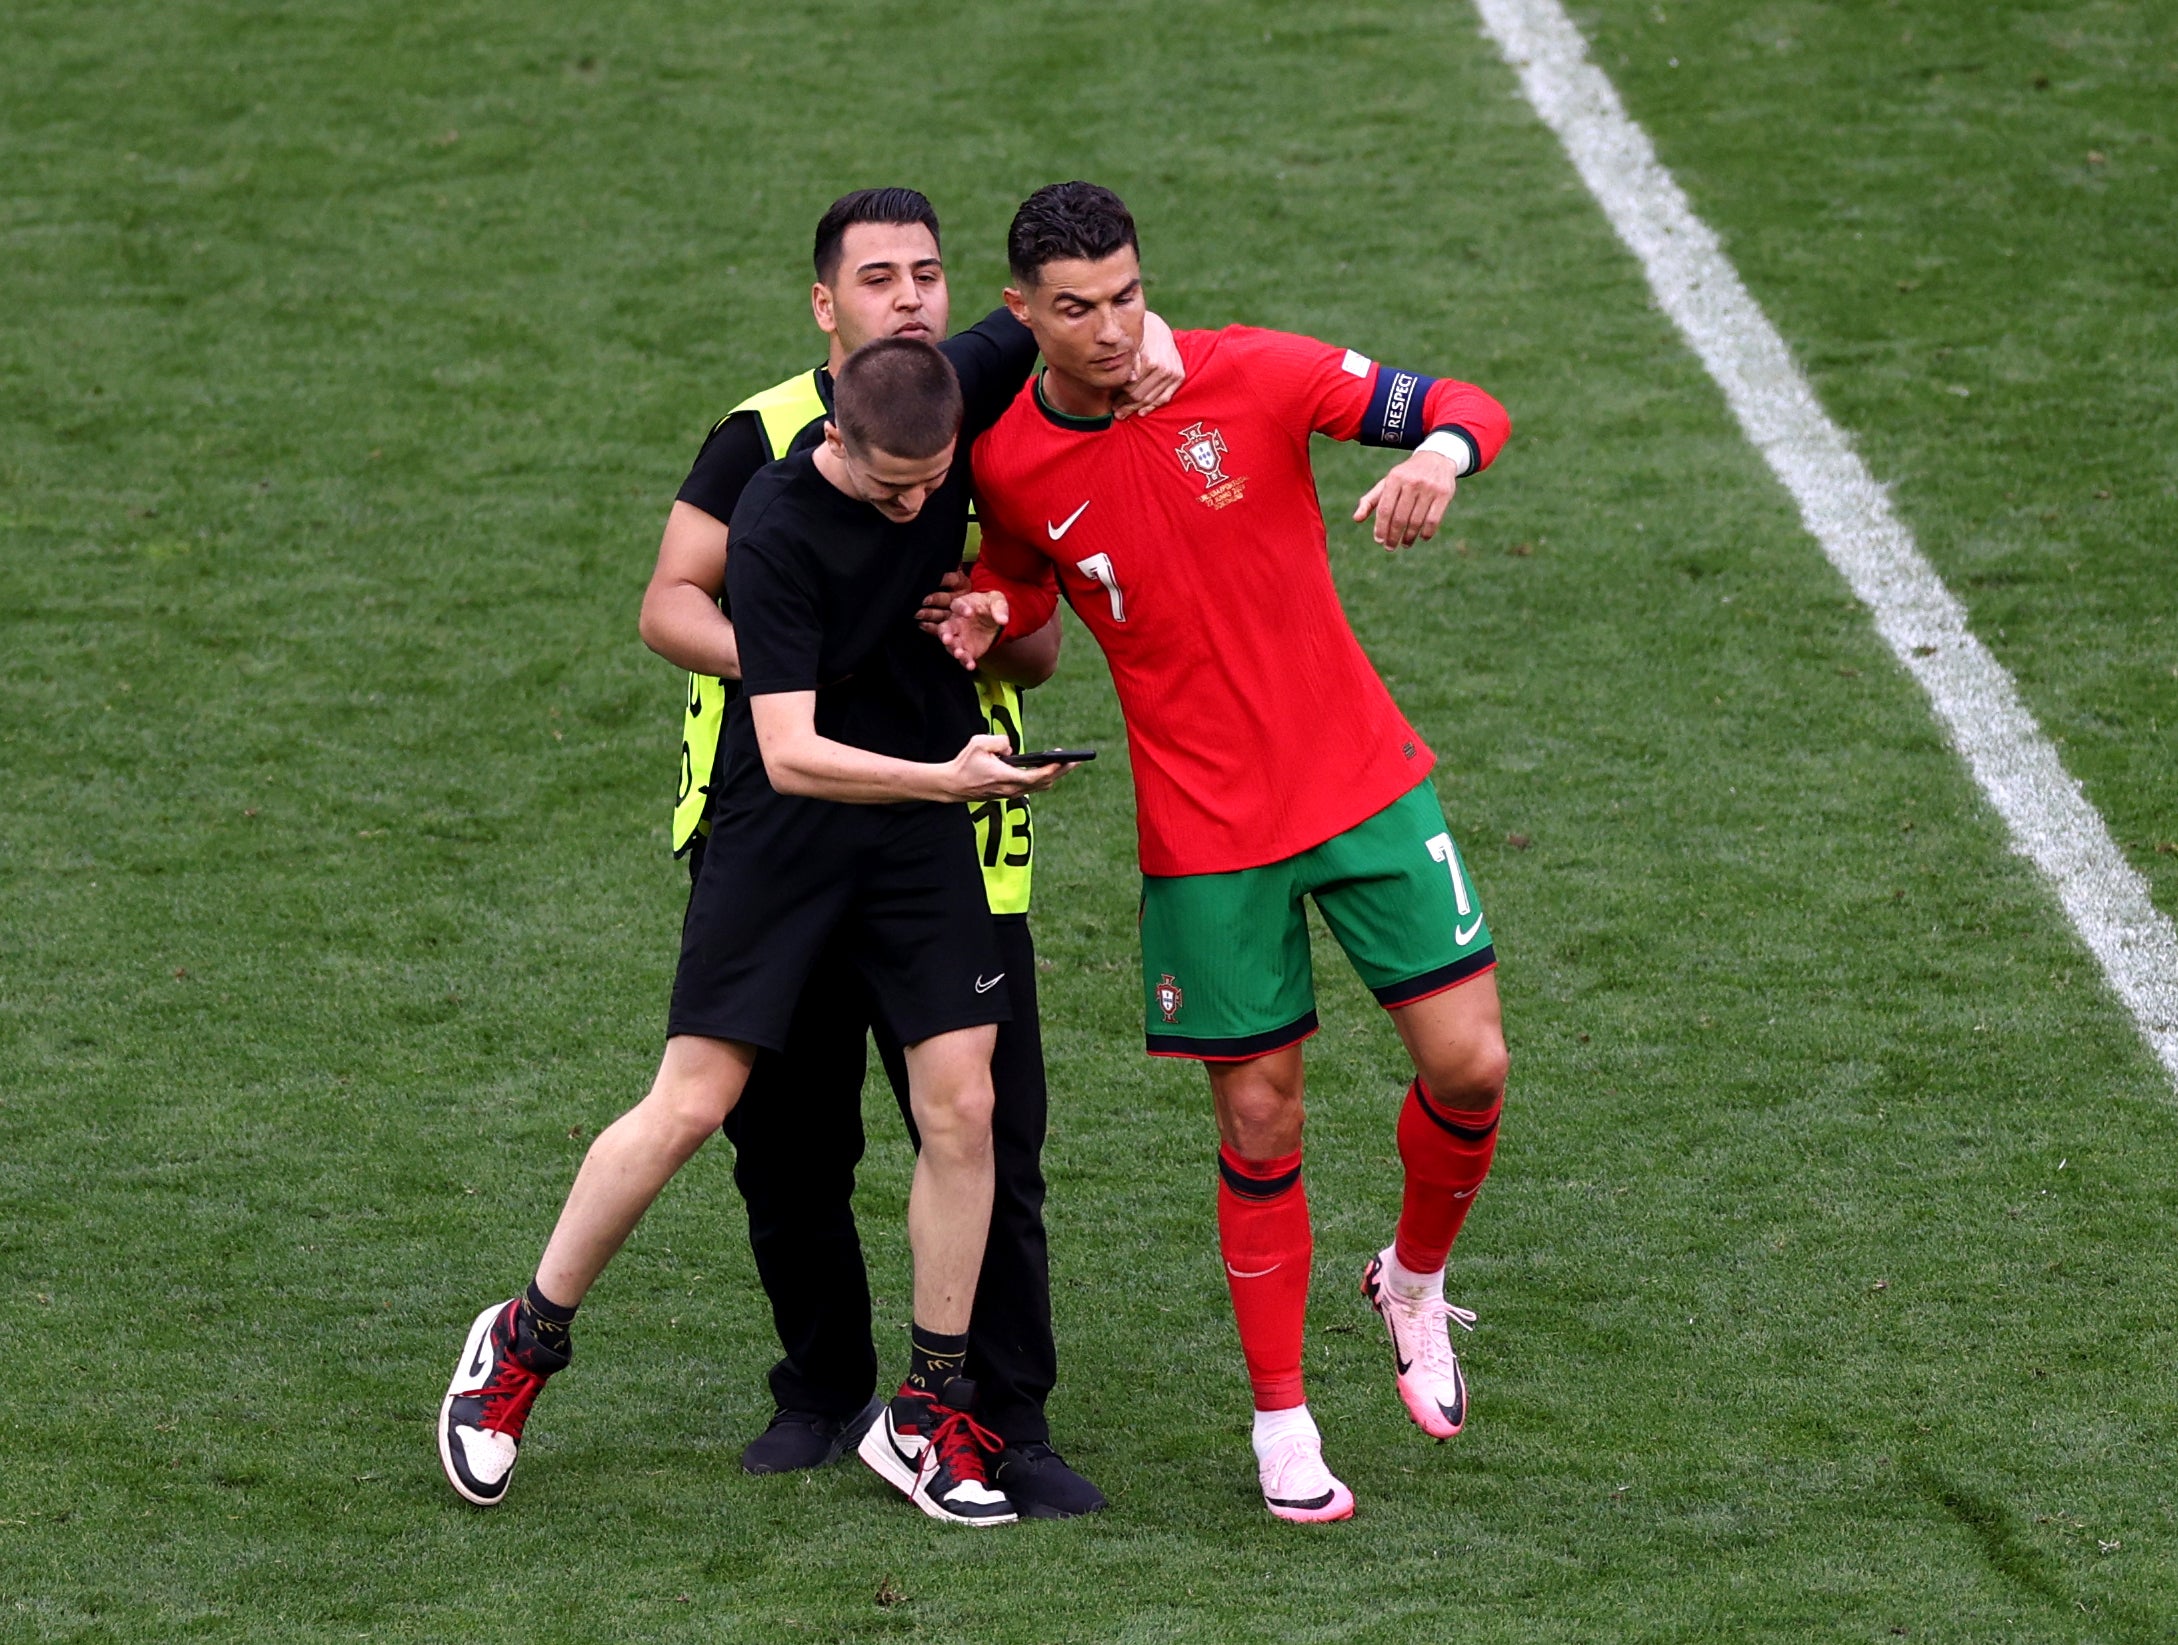 But the next pitch invader managed to reach Ronaldo and grabbed him